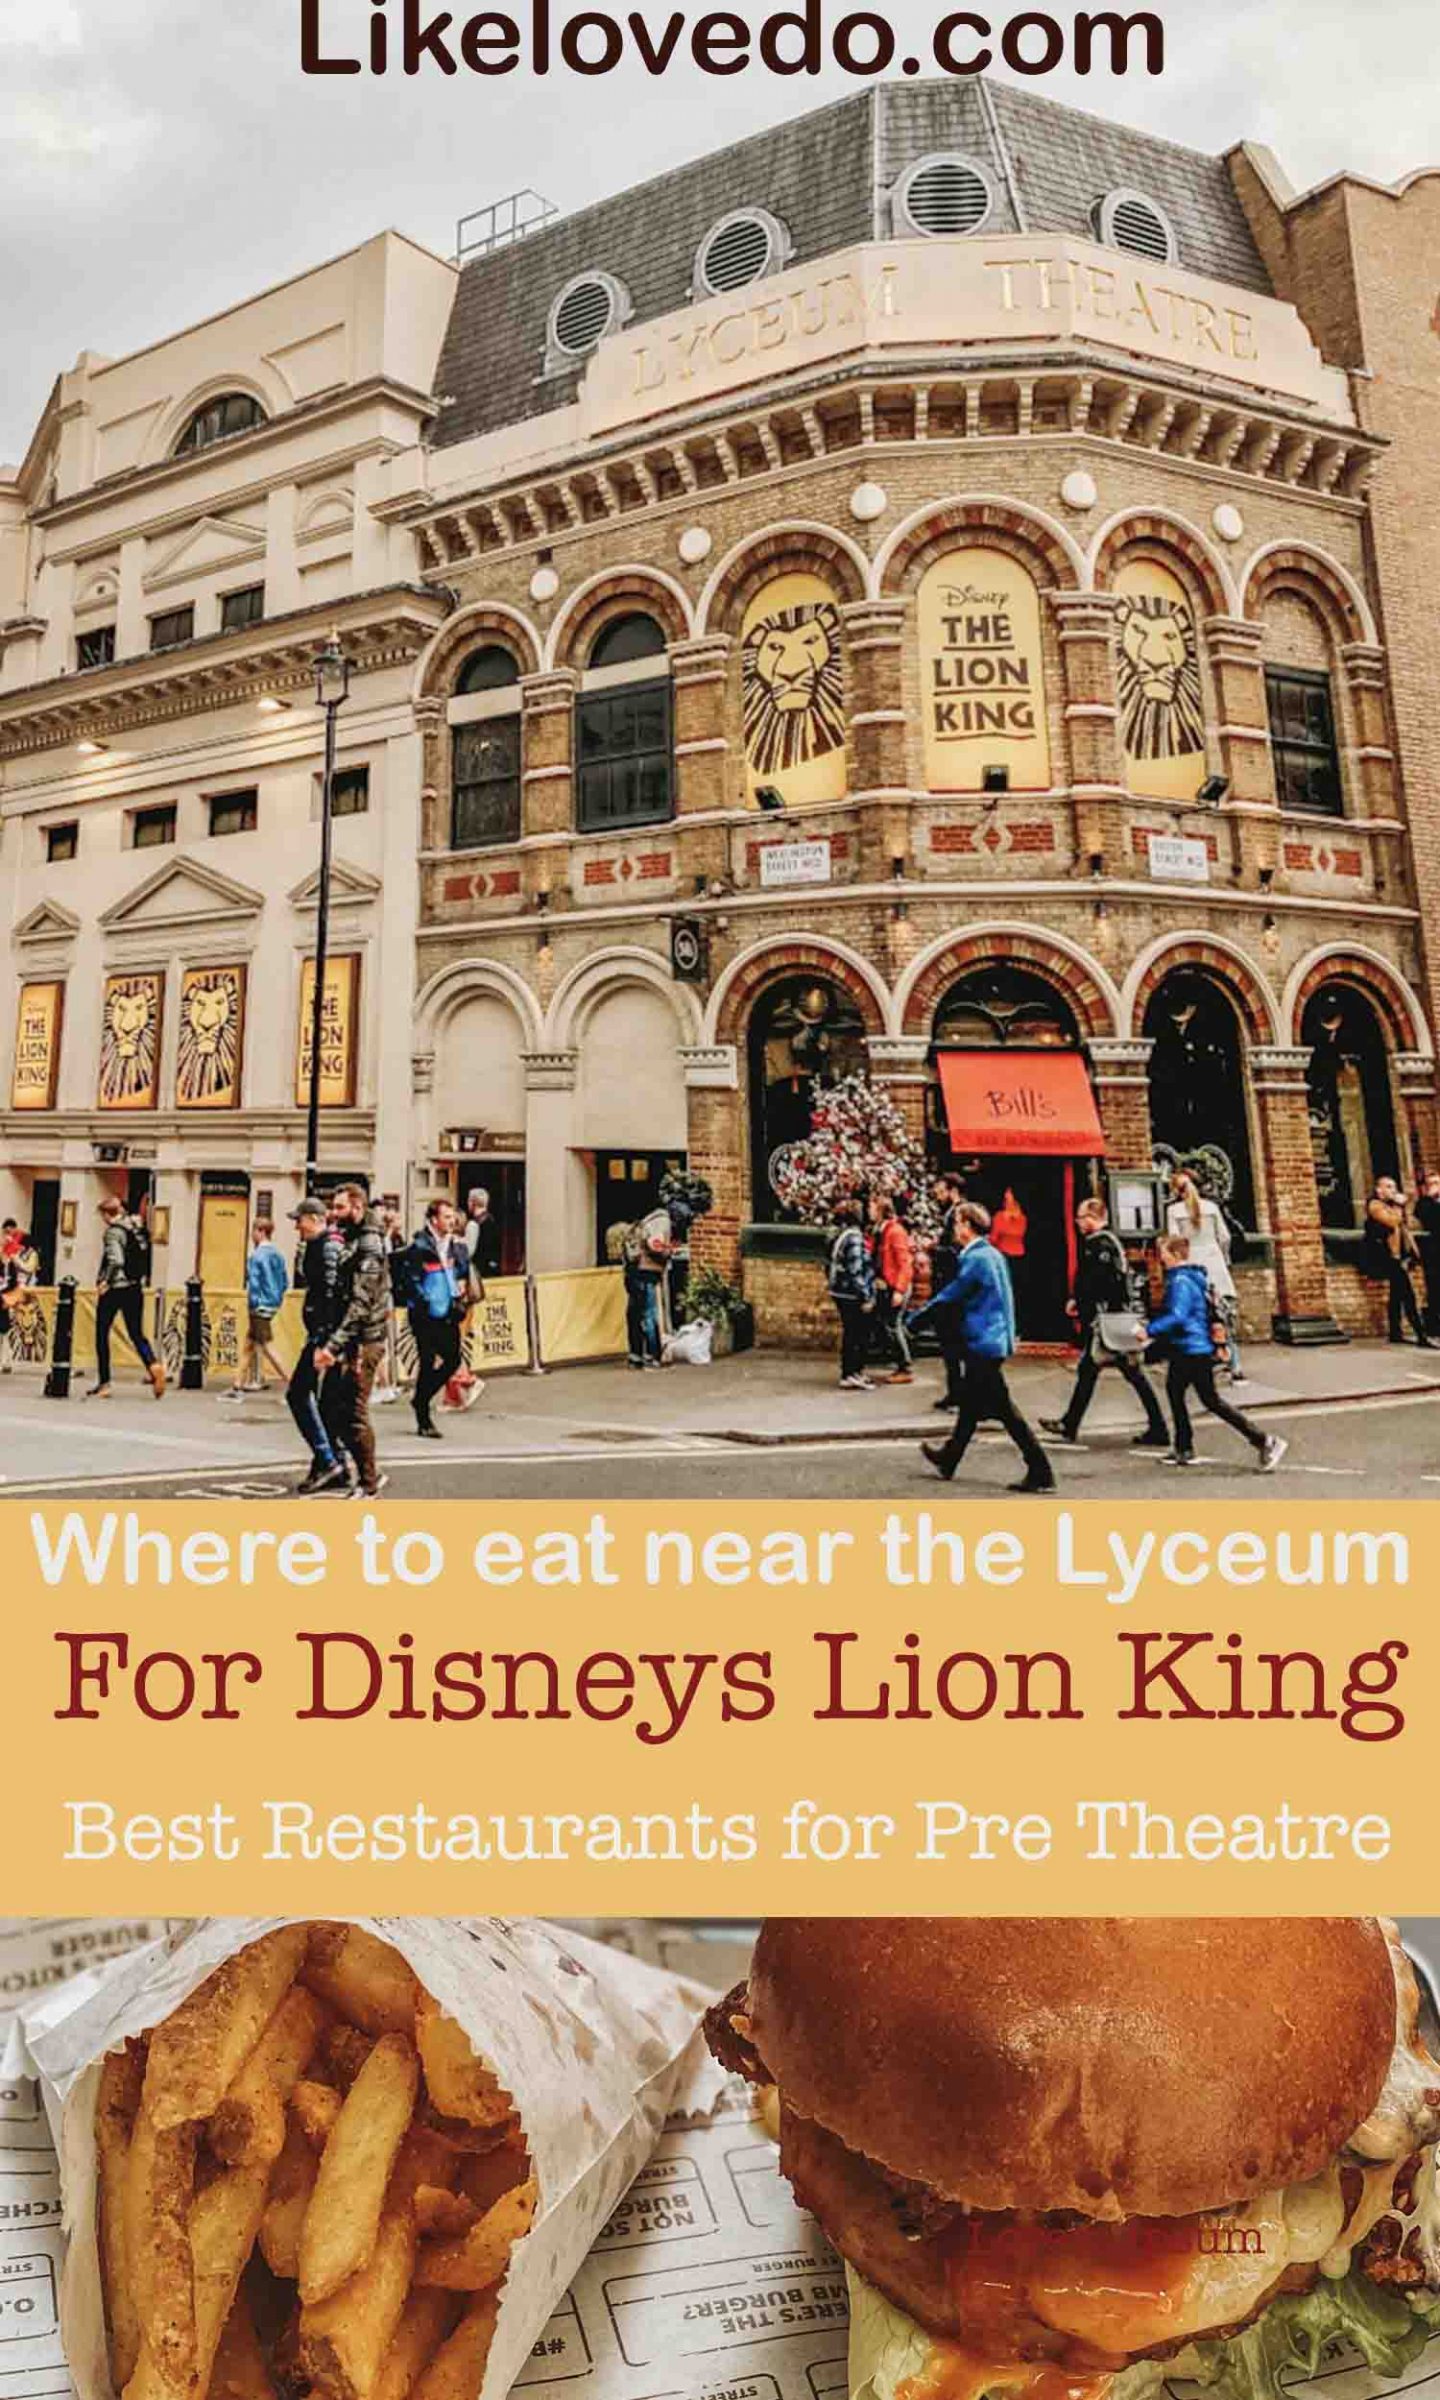 Restaurants near the Lyceum theatre London.
Where to eat near Disneys the Lion king at the Lyceum Theatre London